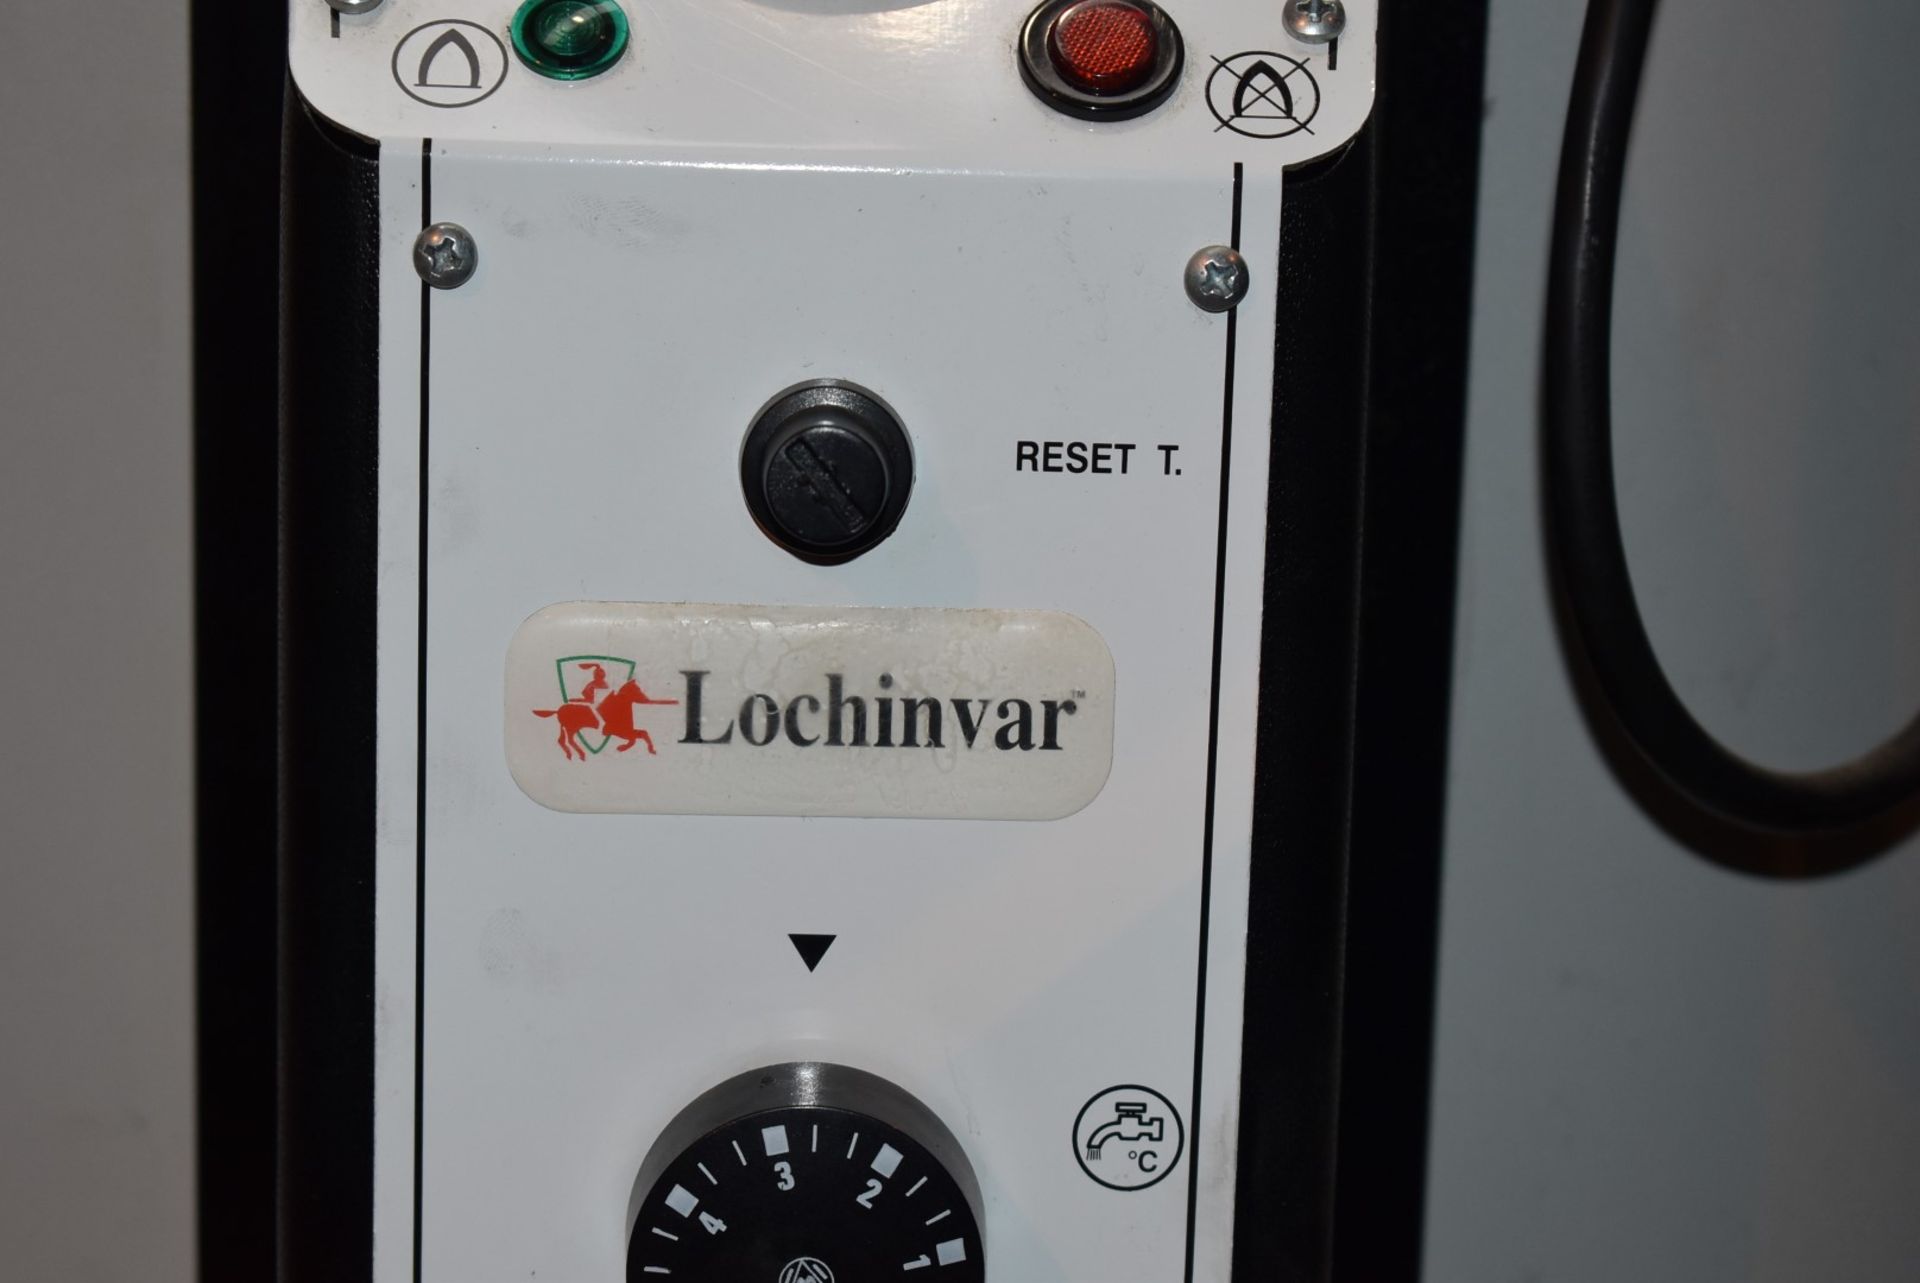 1 x Lochinvar High Efficiency Gas Fired 220L Storage Water Heater - Model LBF-220 - Ref: WH2-144 H5D - Image 2 of 19